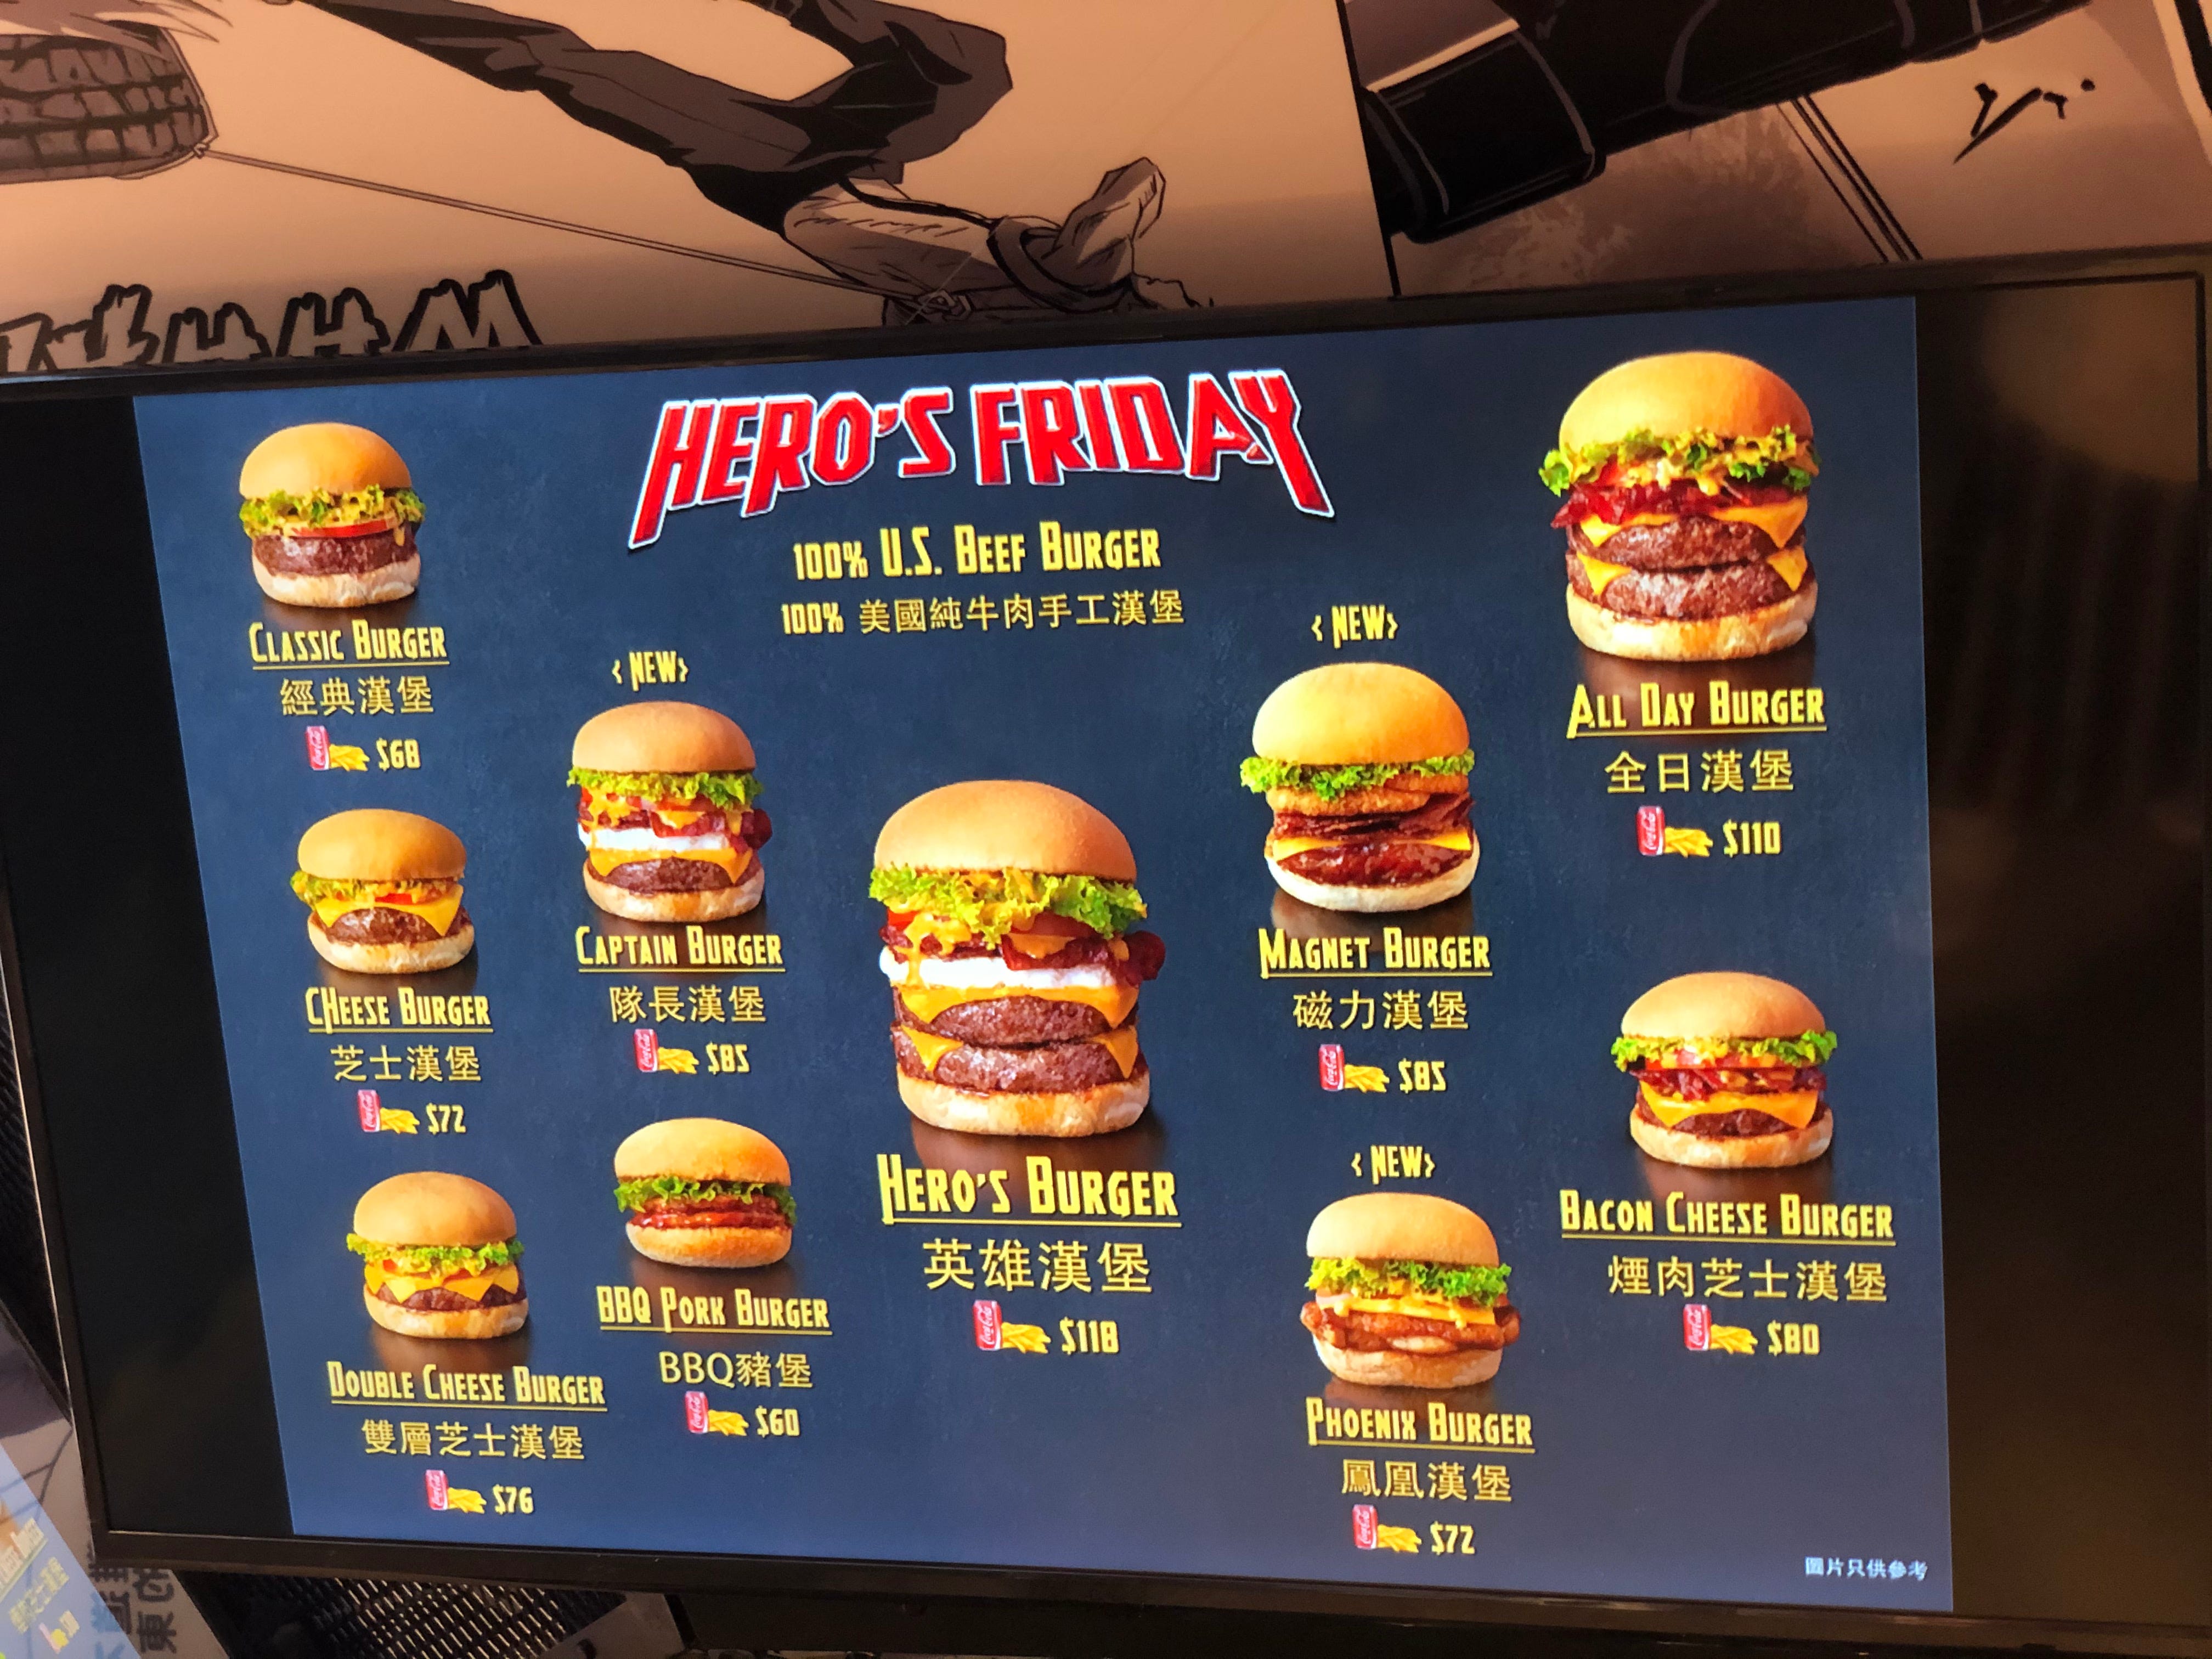 Hero S Friday When The Burger Heroes Save Your Day By Missy Indy Whatindyeats Medium